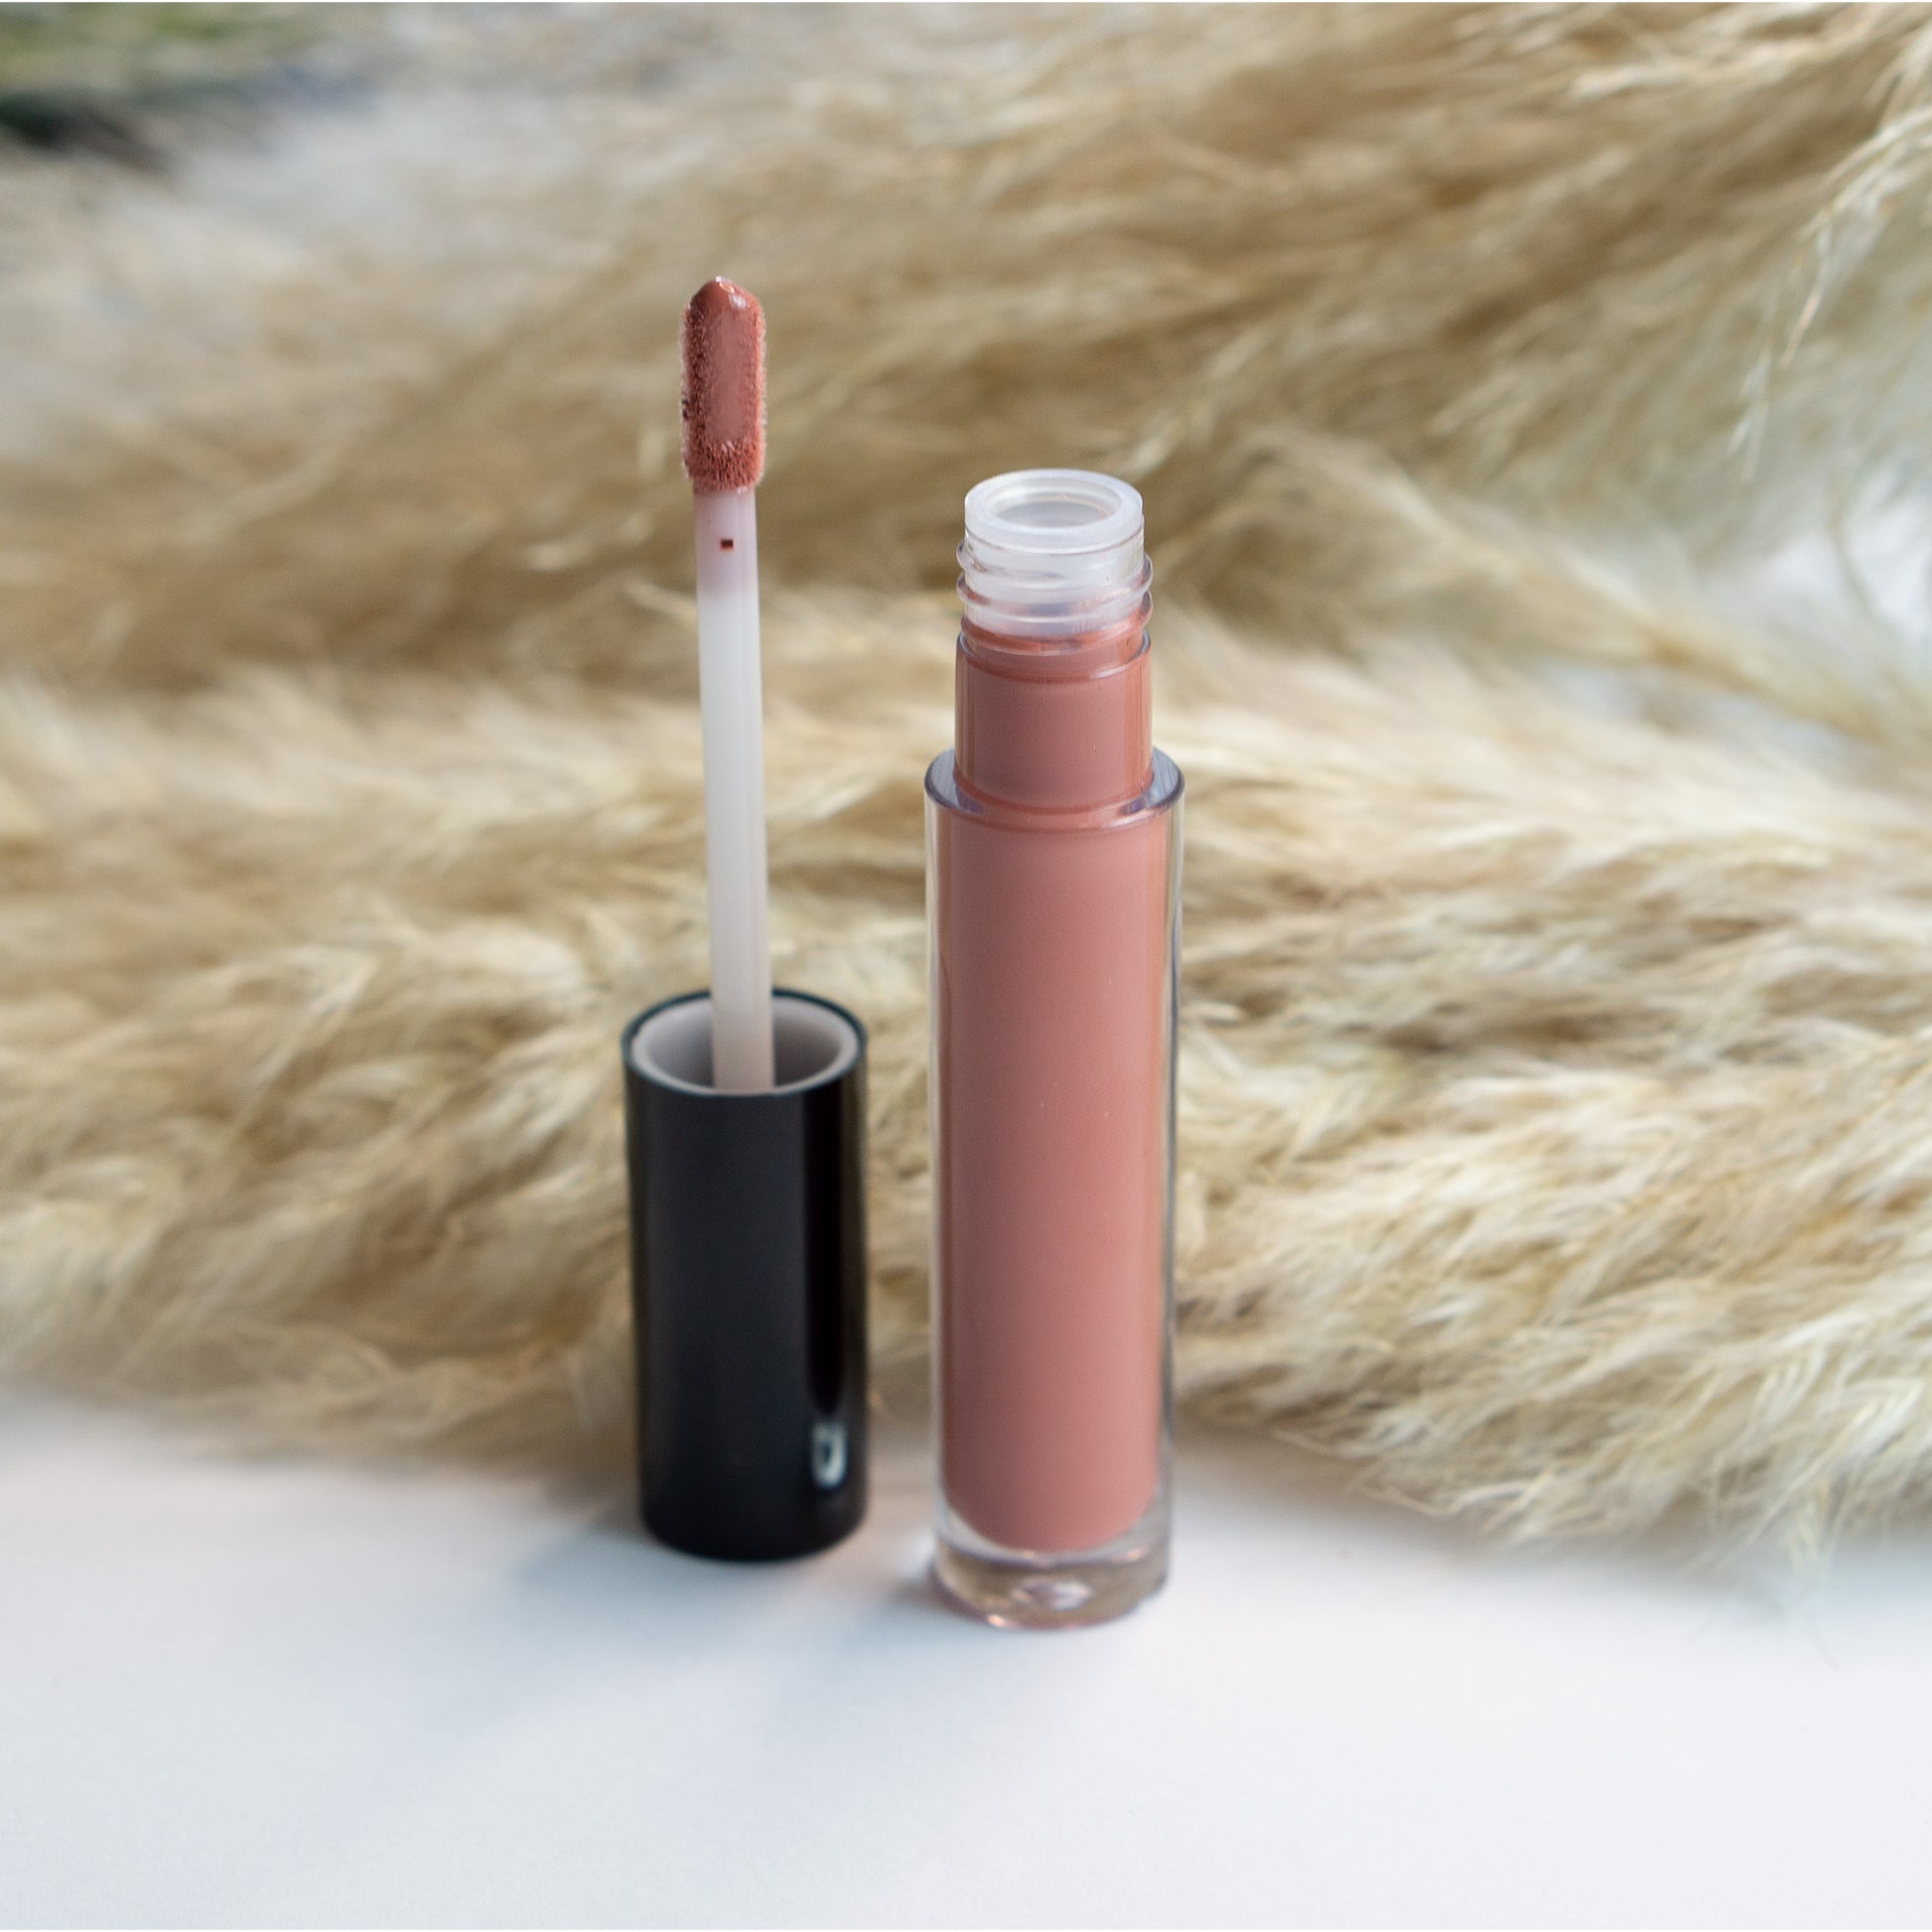 Bring your gloss with you everywhere you go. convenient TSA dimensions. Cruisin Organics Coral Lip Gloss has a liquid shine and SPF. gleam every day. Purchase today for cruzn convenience for women throughout the Coral Reef at our online store.